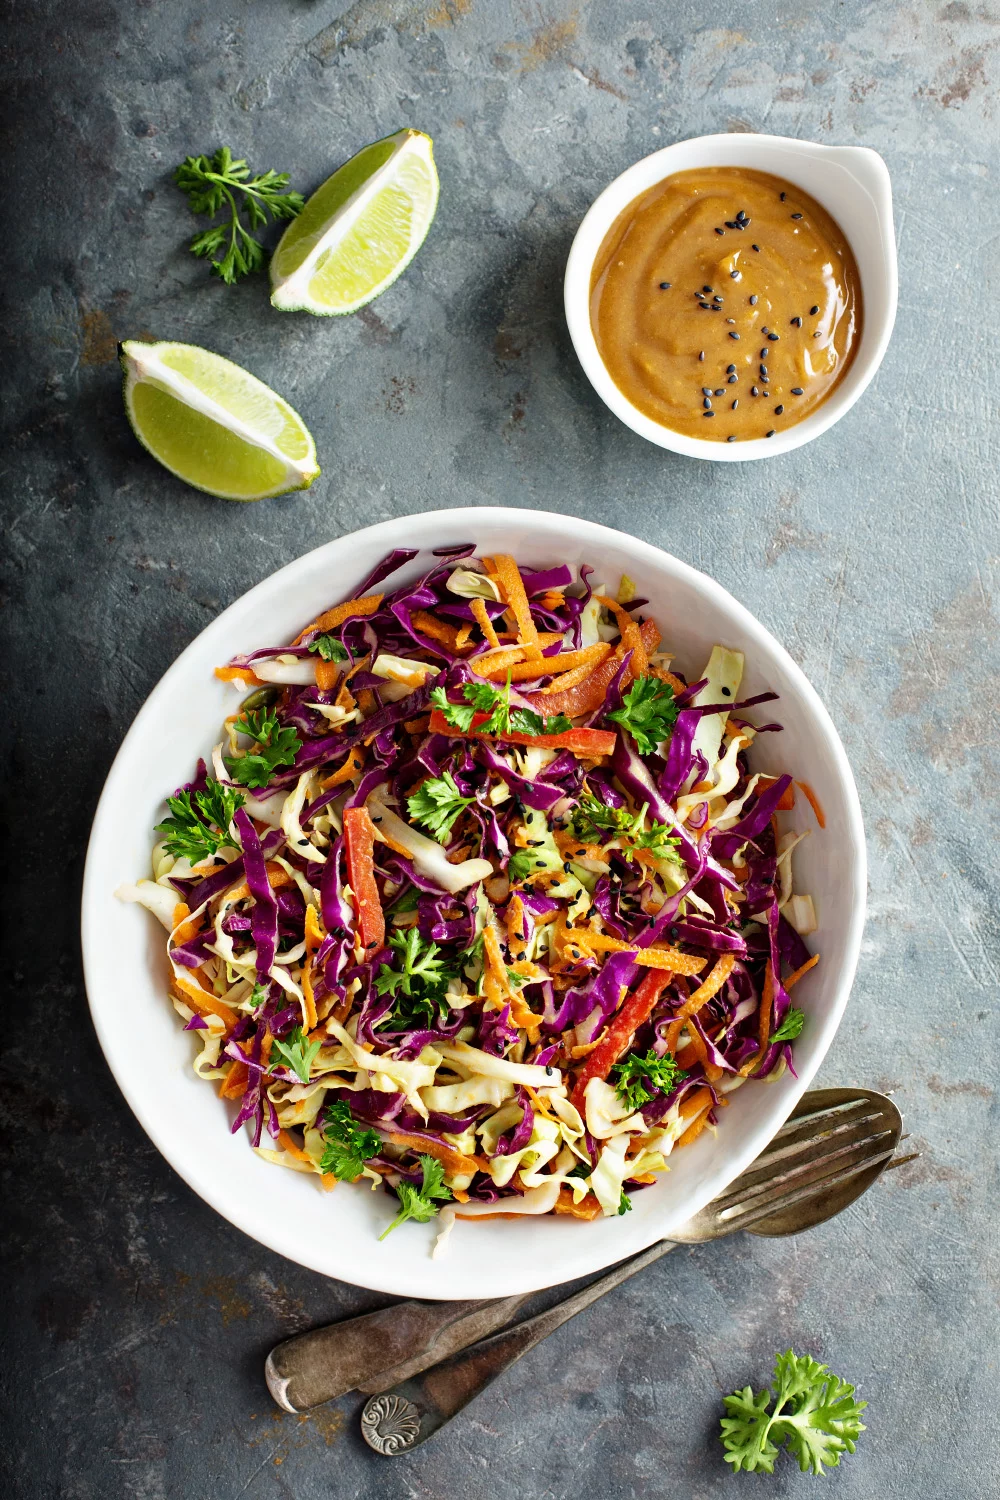 Asian Slaw | Cooking Clue | The Eater's Manifesto